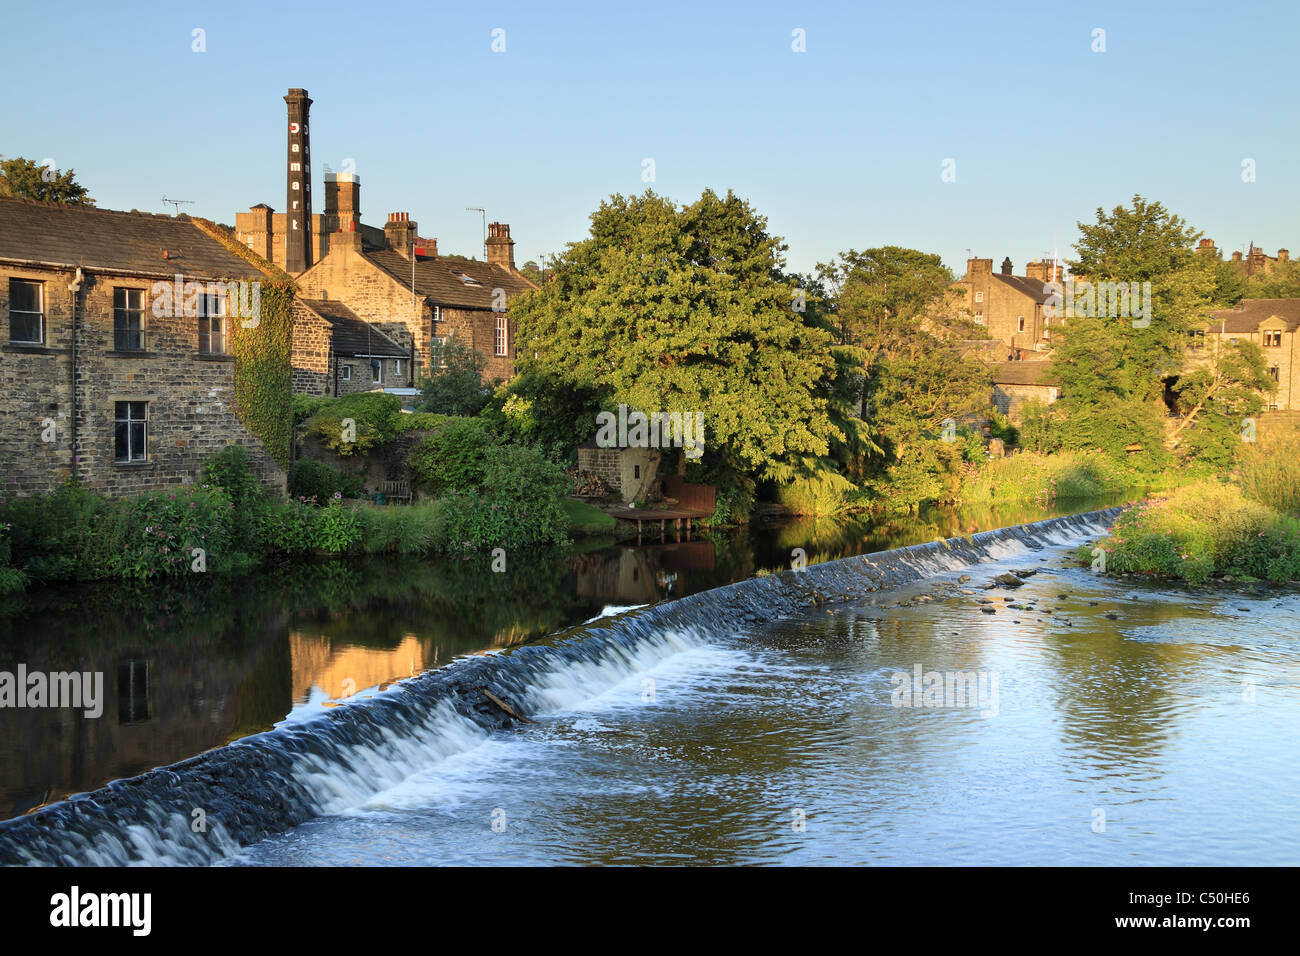 A wier on the River Aire, in Bingley, West Yorkshire Stock Photo